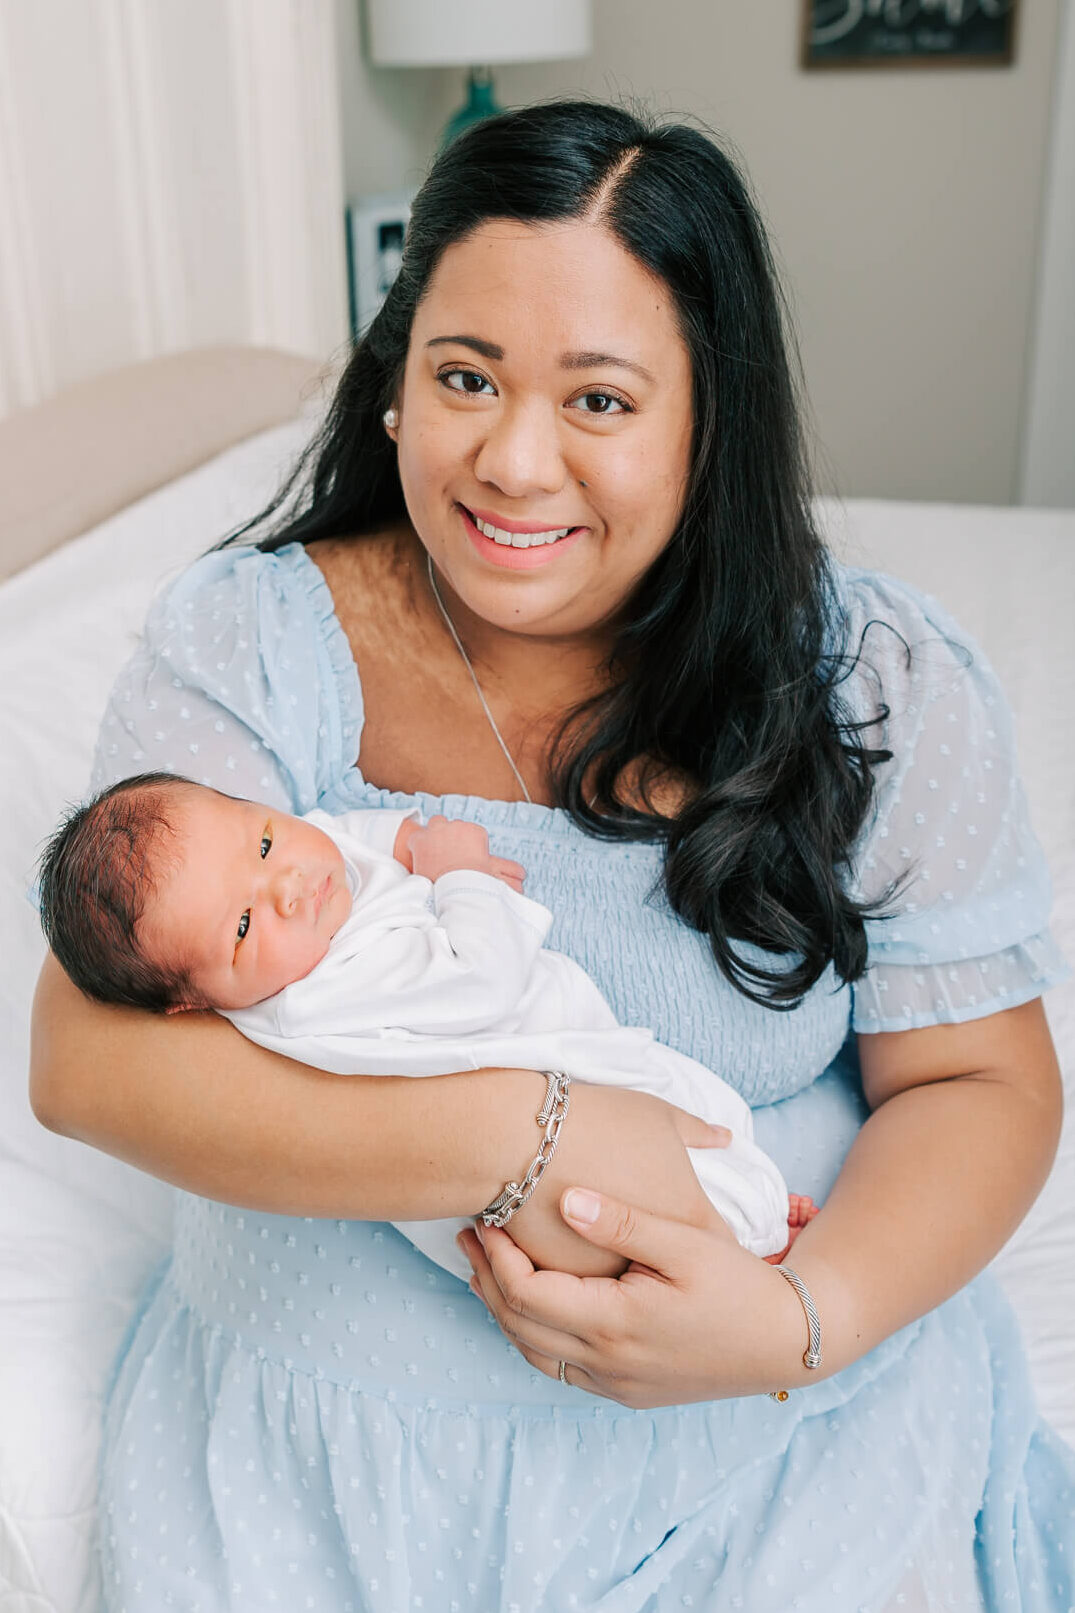 Mom and new baby boy share a smile during their in home newborn session with molly berry photography in atlanta.